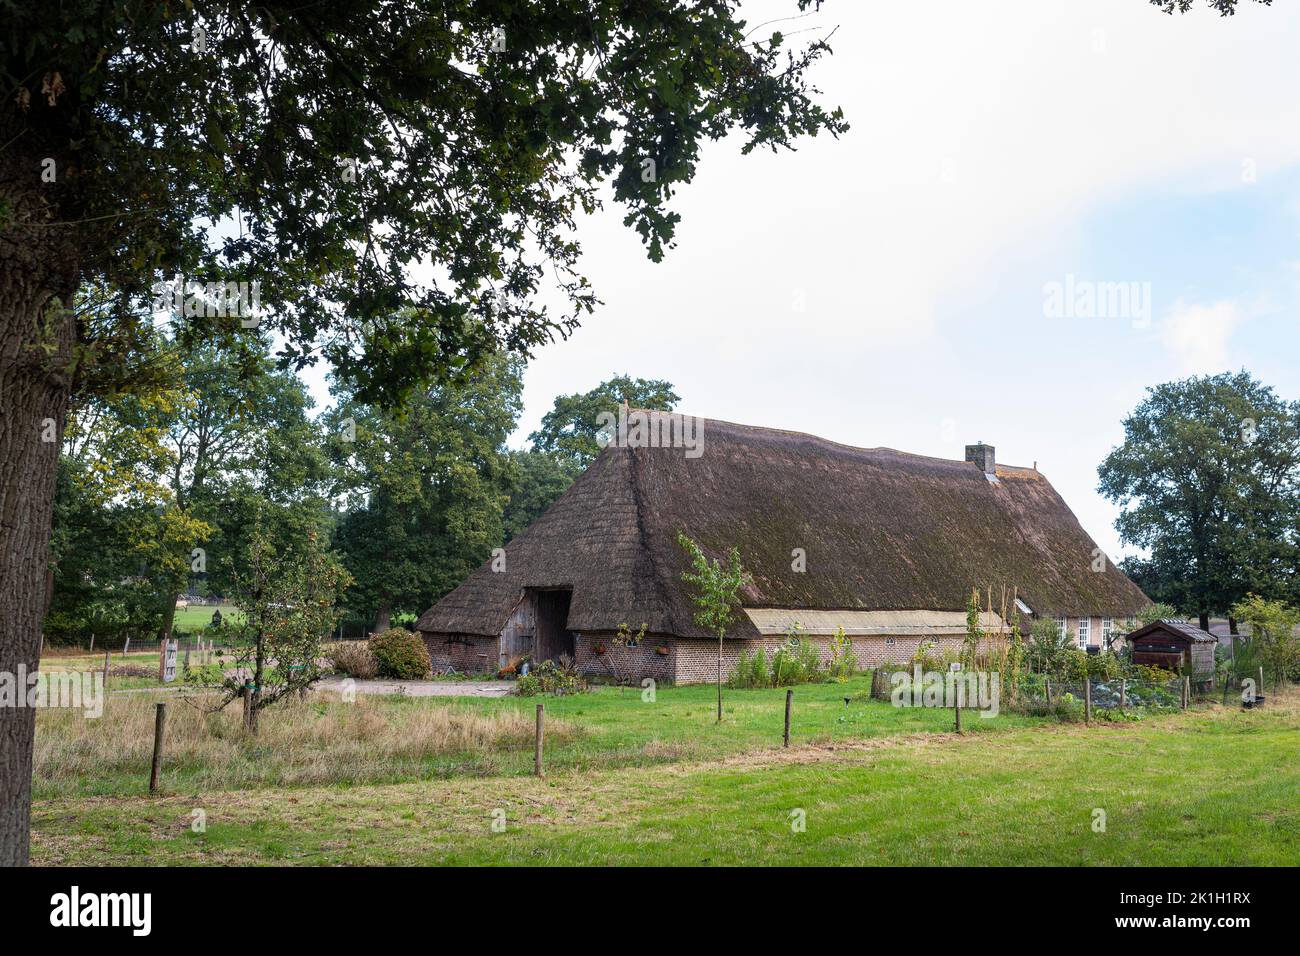 Authentic old farm in Oud Aalden, province Drenthe, Netherlands Stock Photo